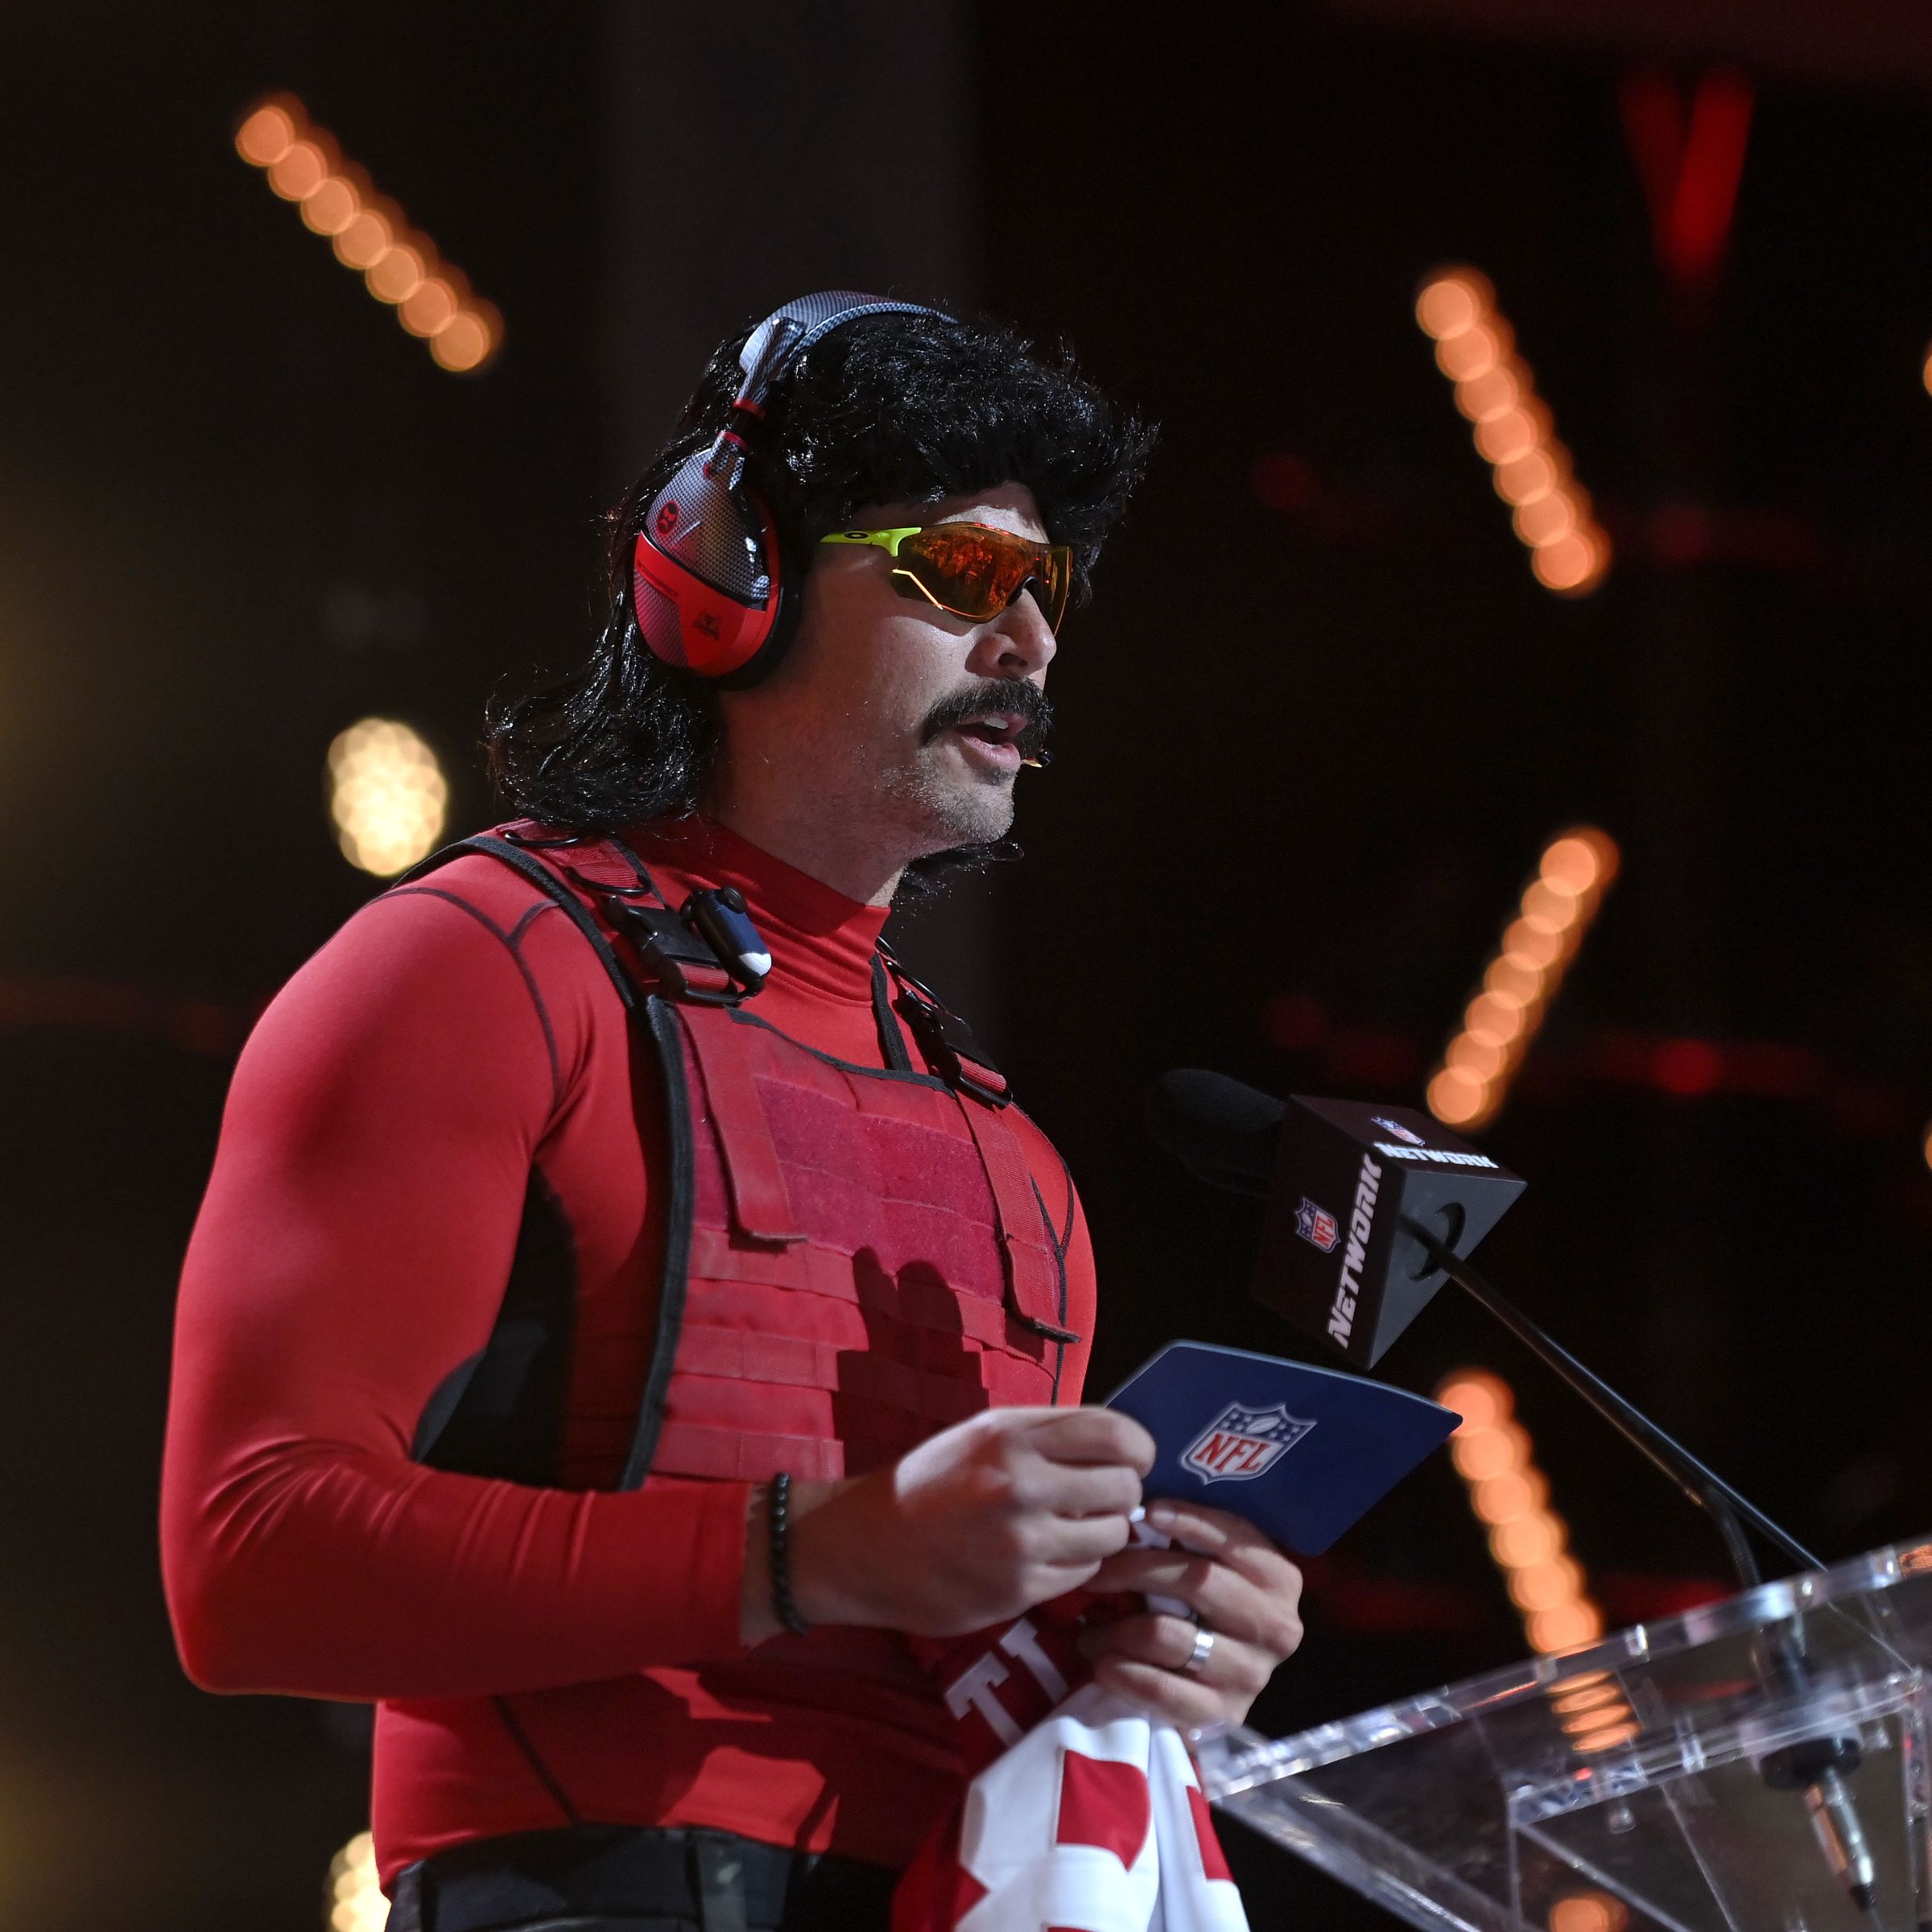 A photograph of Guy Beahm, also known as Dr Disrespect, at the 2022 NFL Draft